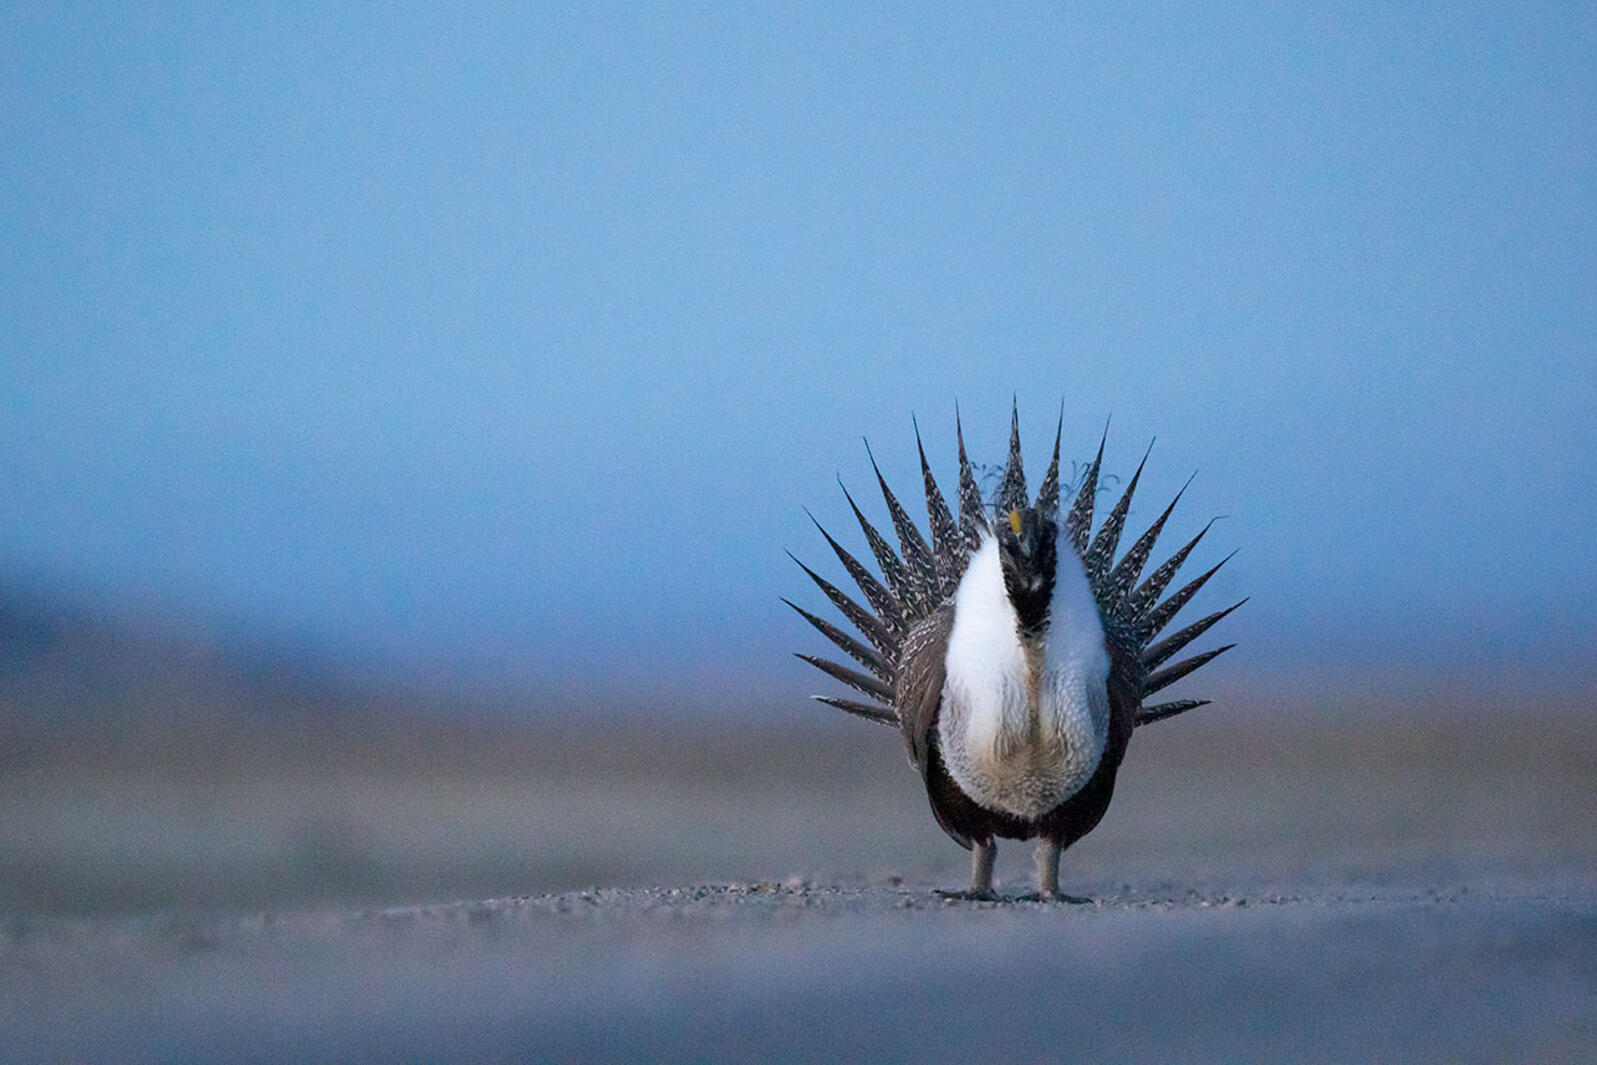 A Greater Sage-Grouse displays on a road at dusk.